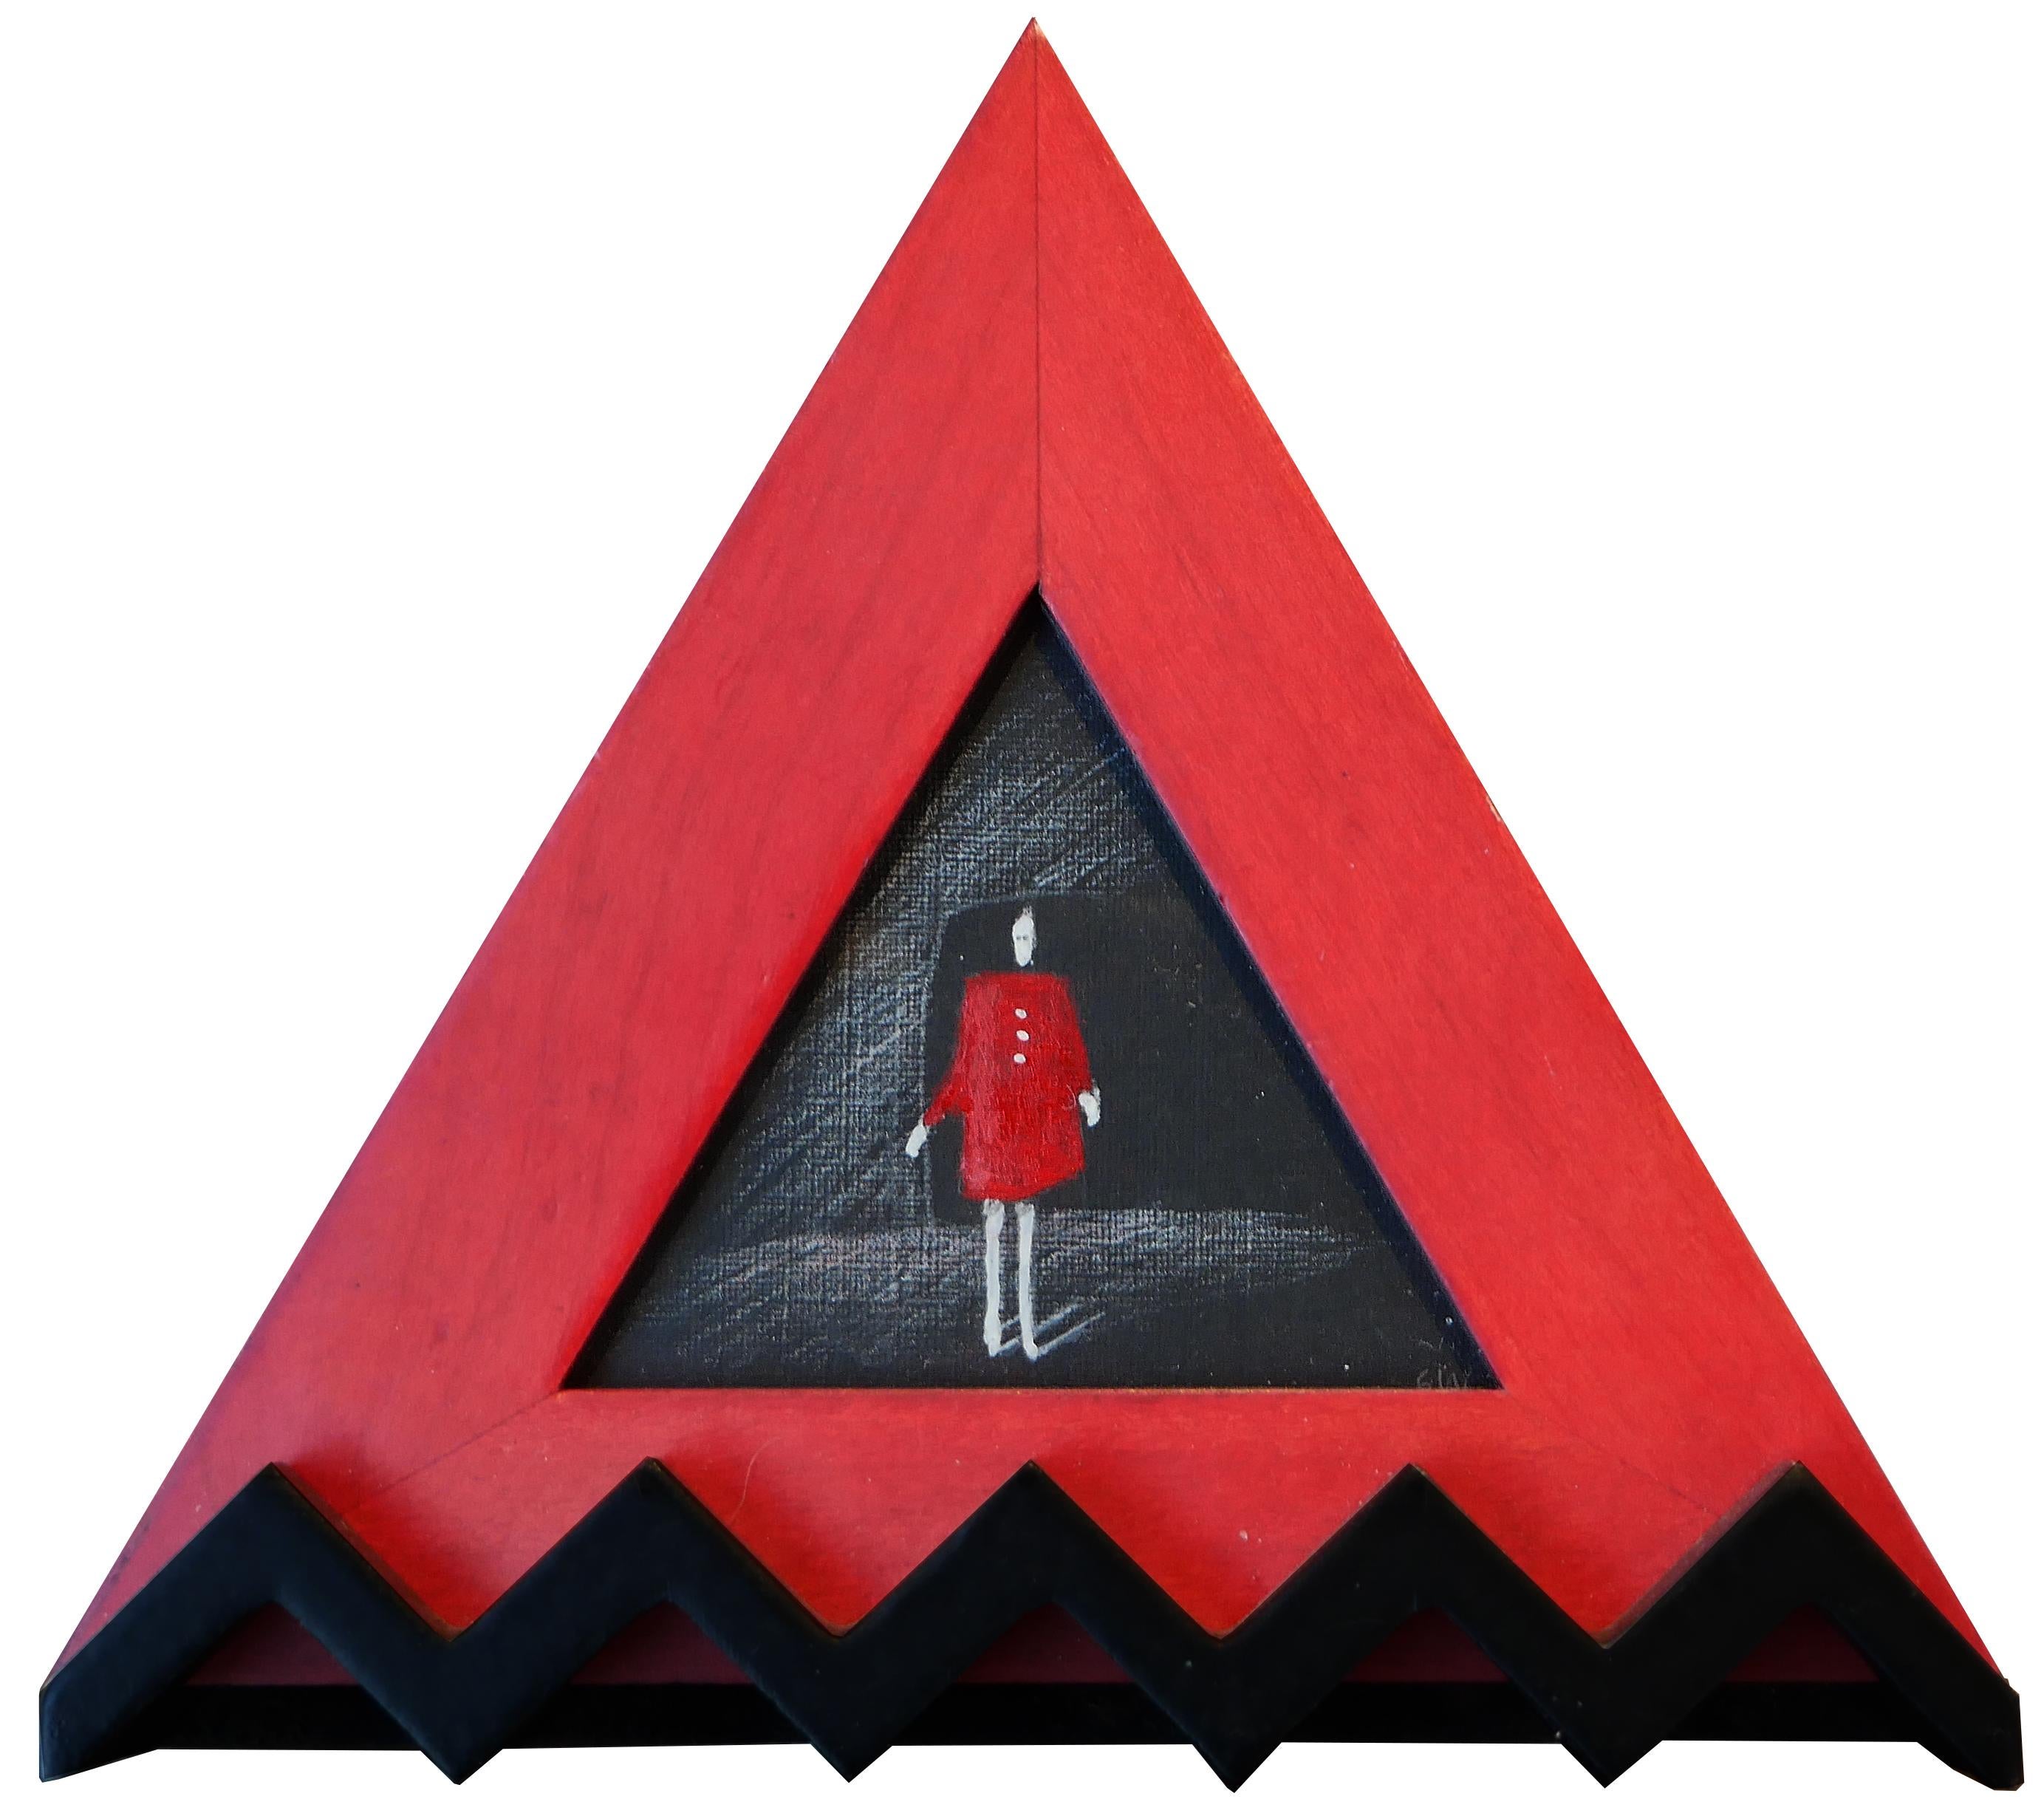 Scott Woodard Abstract Painting - "Red Dress" Small Red and Black Abstract Figurative Painting in a Triangle Frame